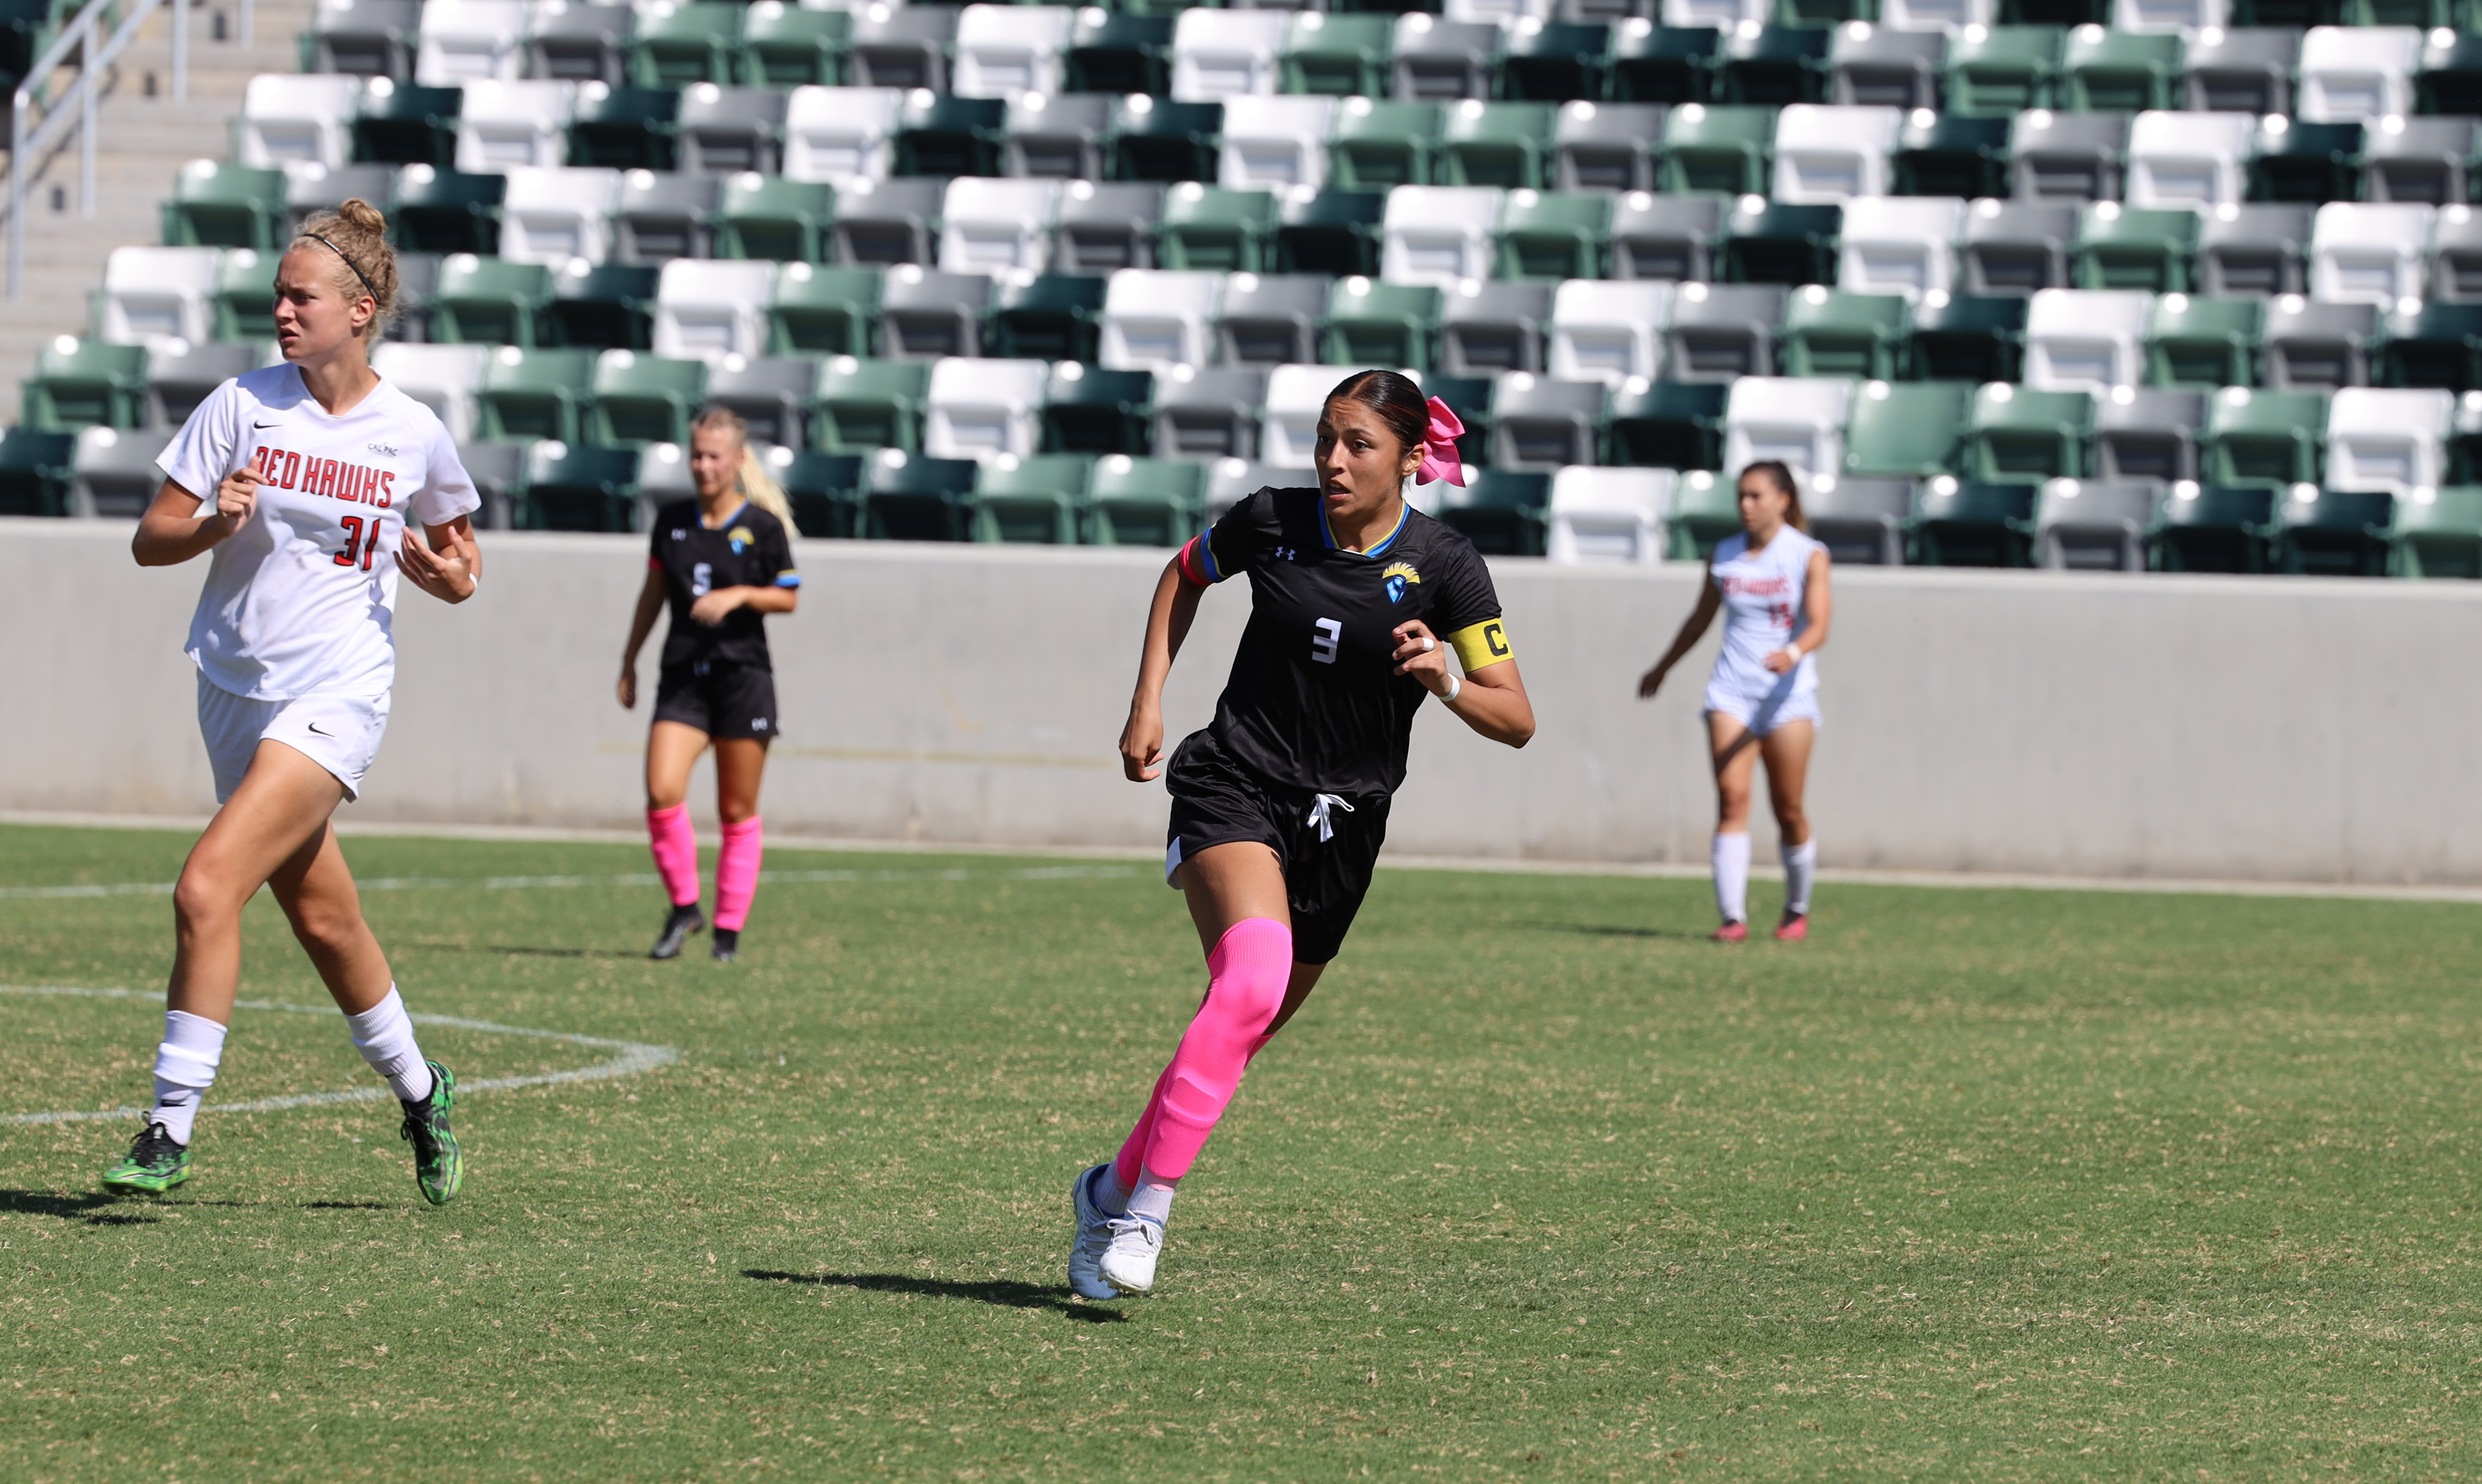 Alessandra Ramirez was outstanding Sunday, scoring a goal and picking up an assist. Photo by Sanjay Joshi.